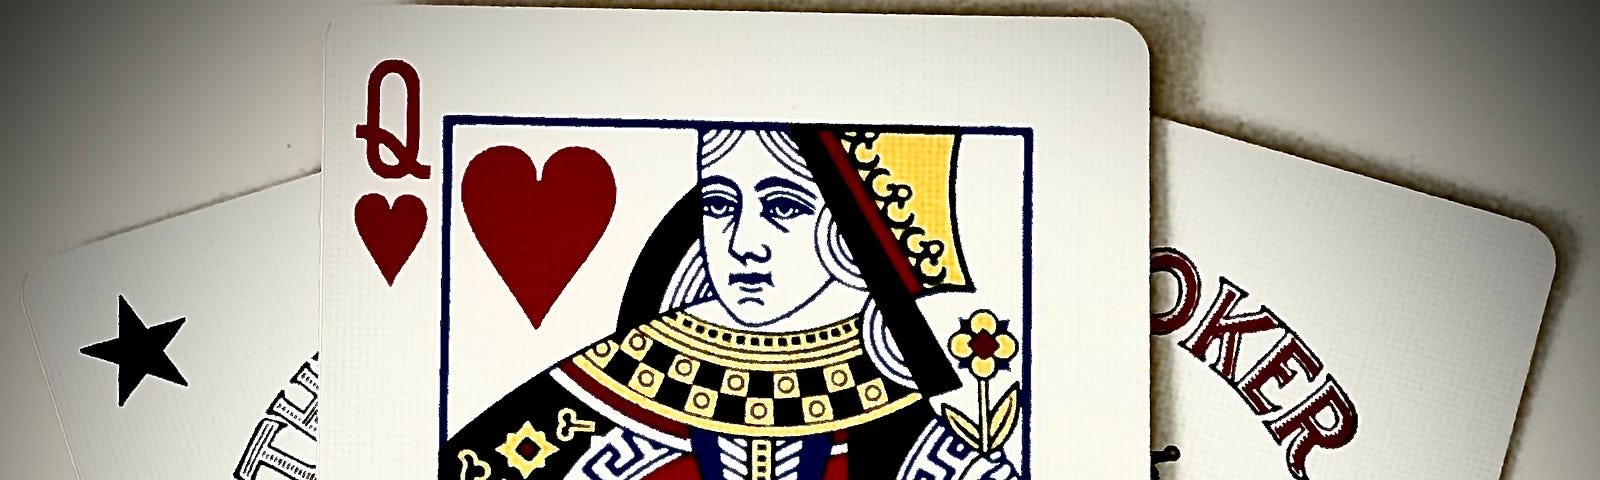 Queen of Hearts playing card flanked by two jokers